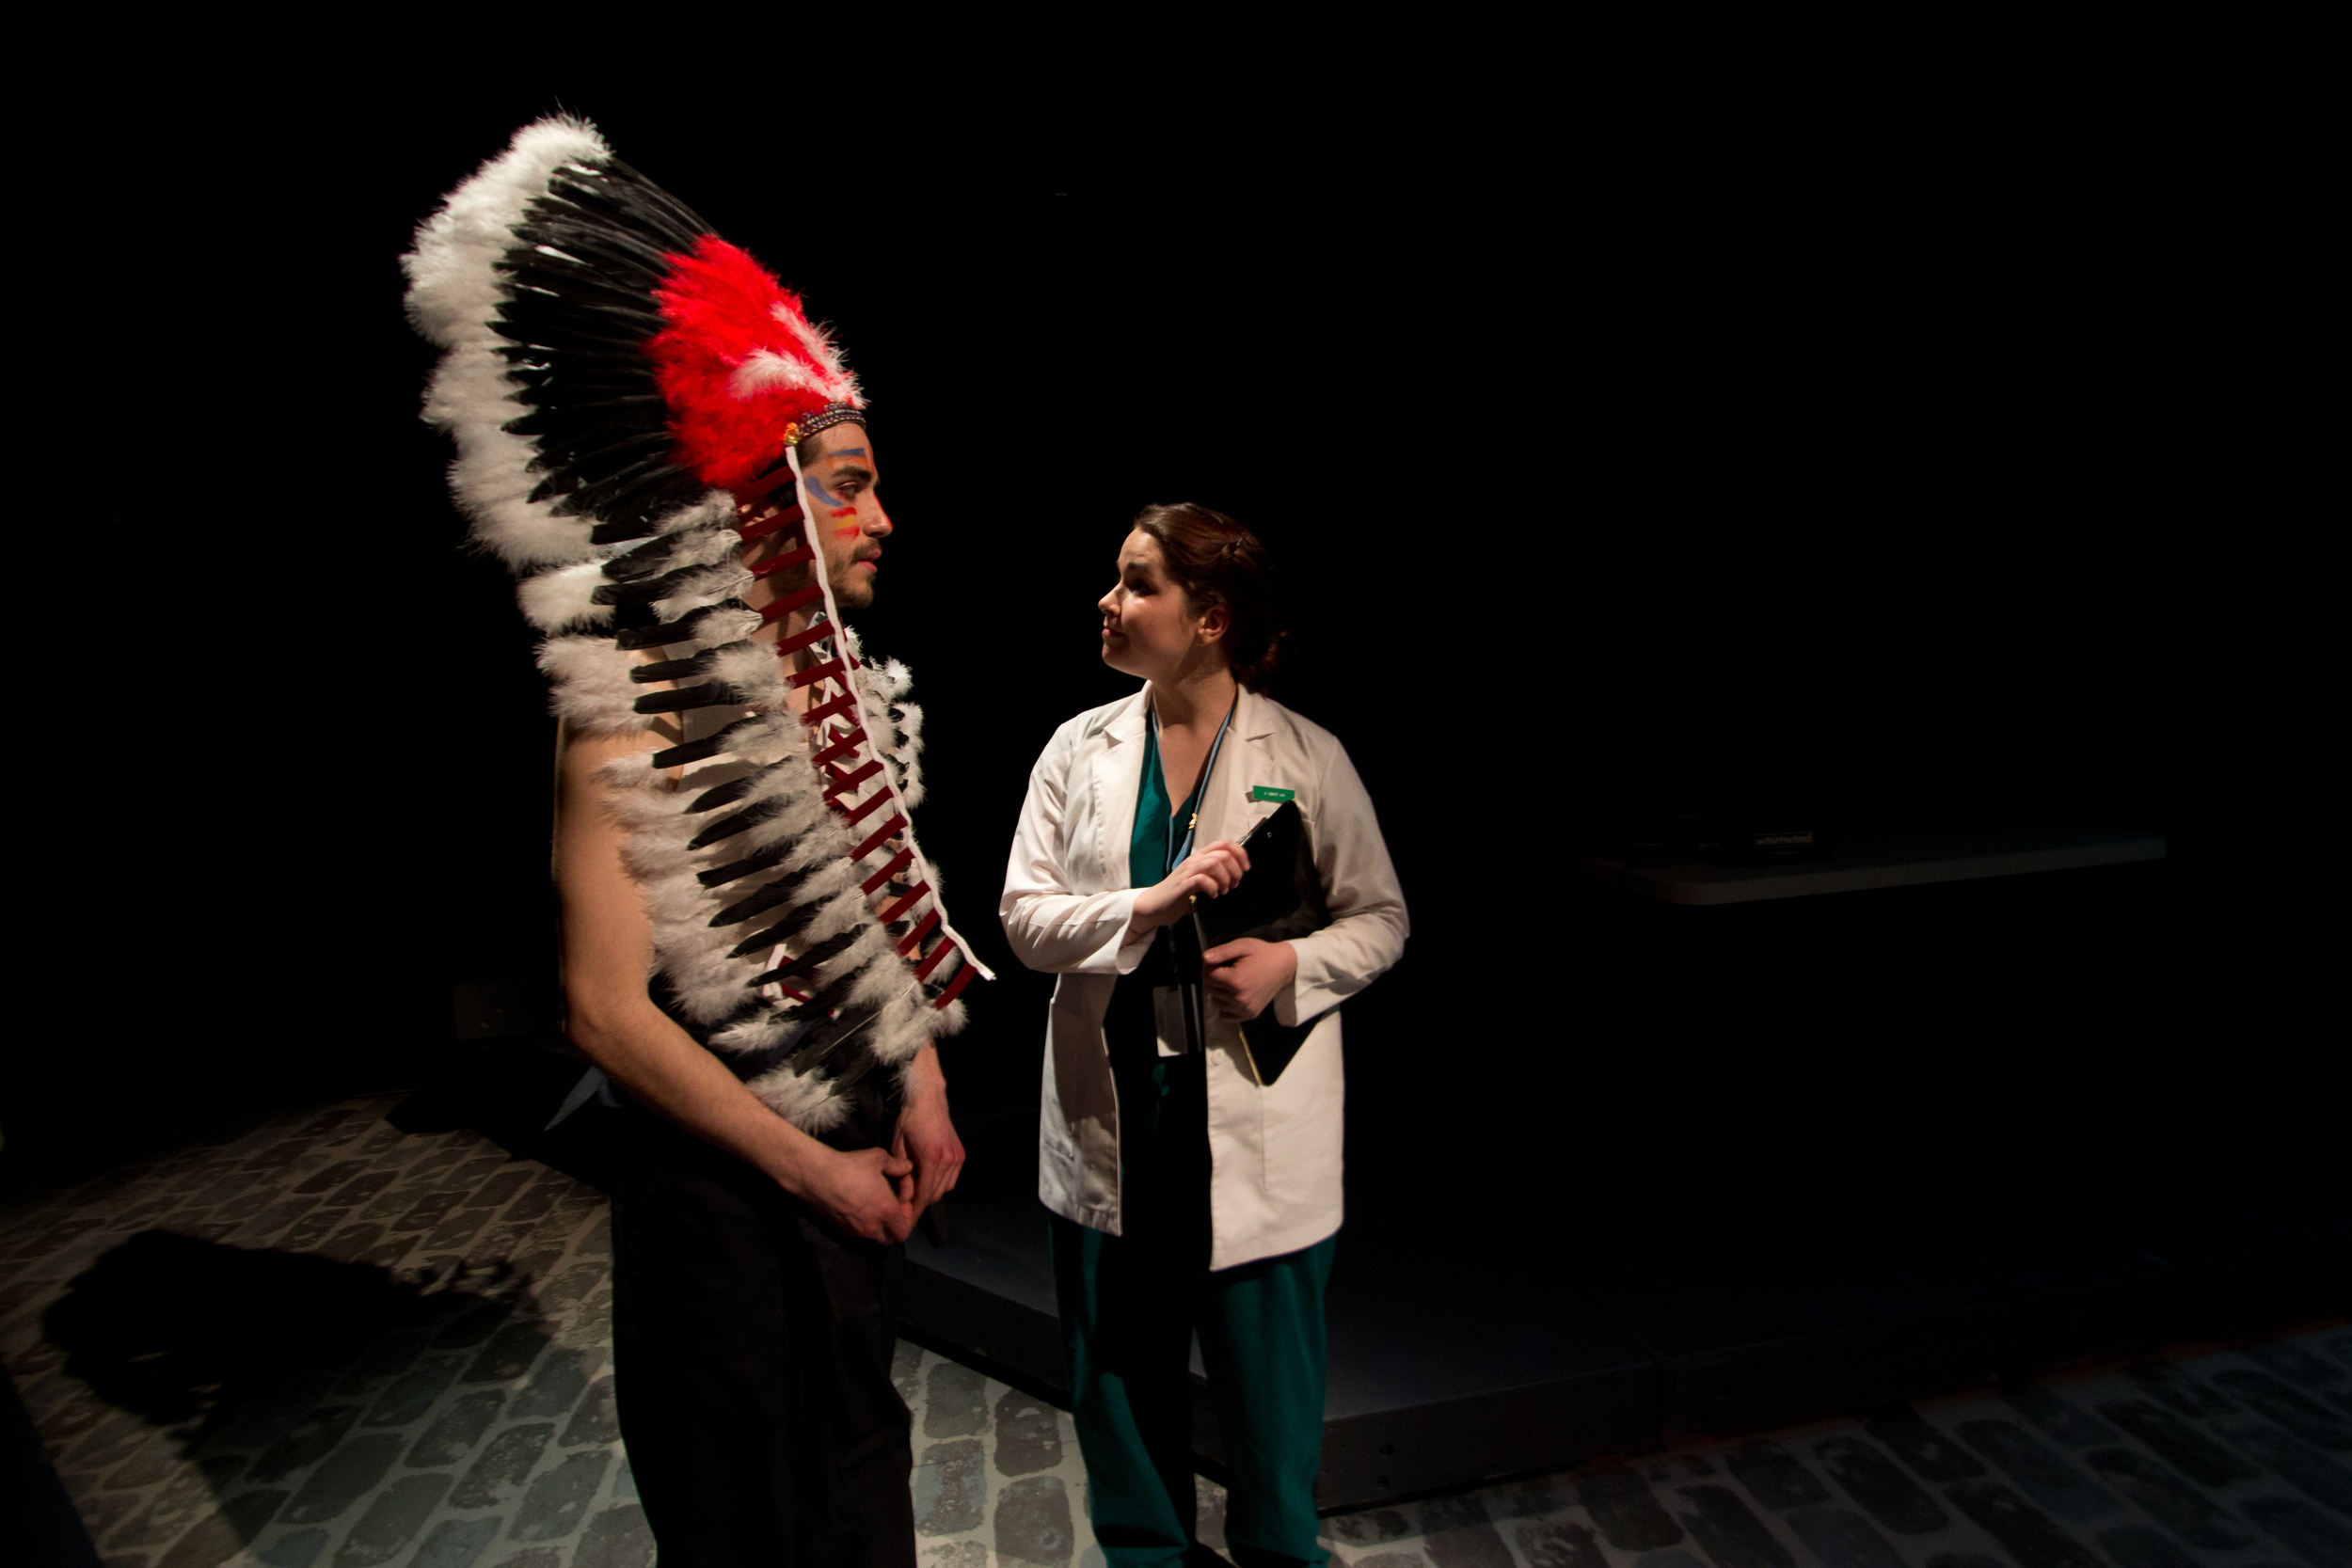   Middletown &nbsp;by Will Eno Directed by Daniel Shure Skidmore College, 2014 Photos by&nbsp; Madi Ellis  